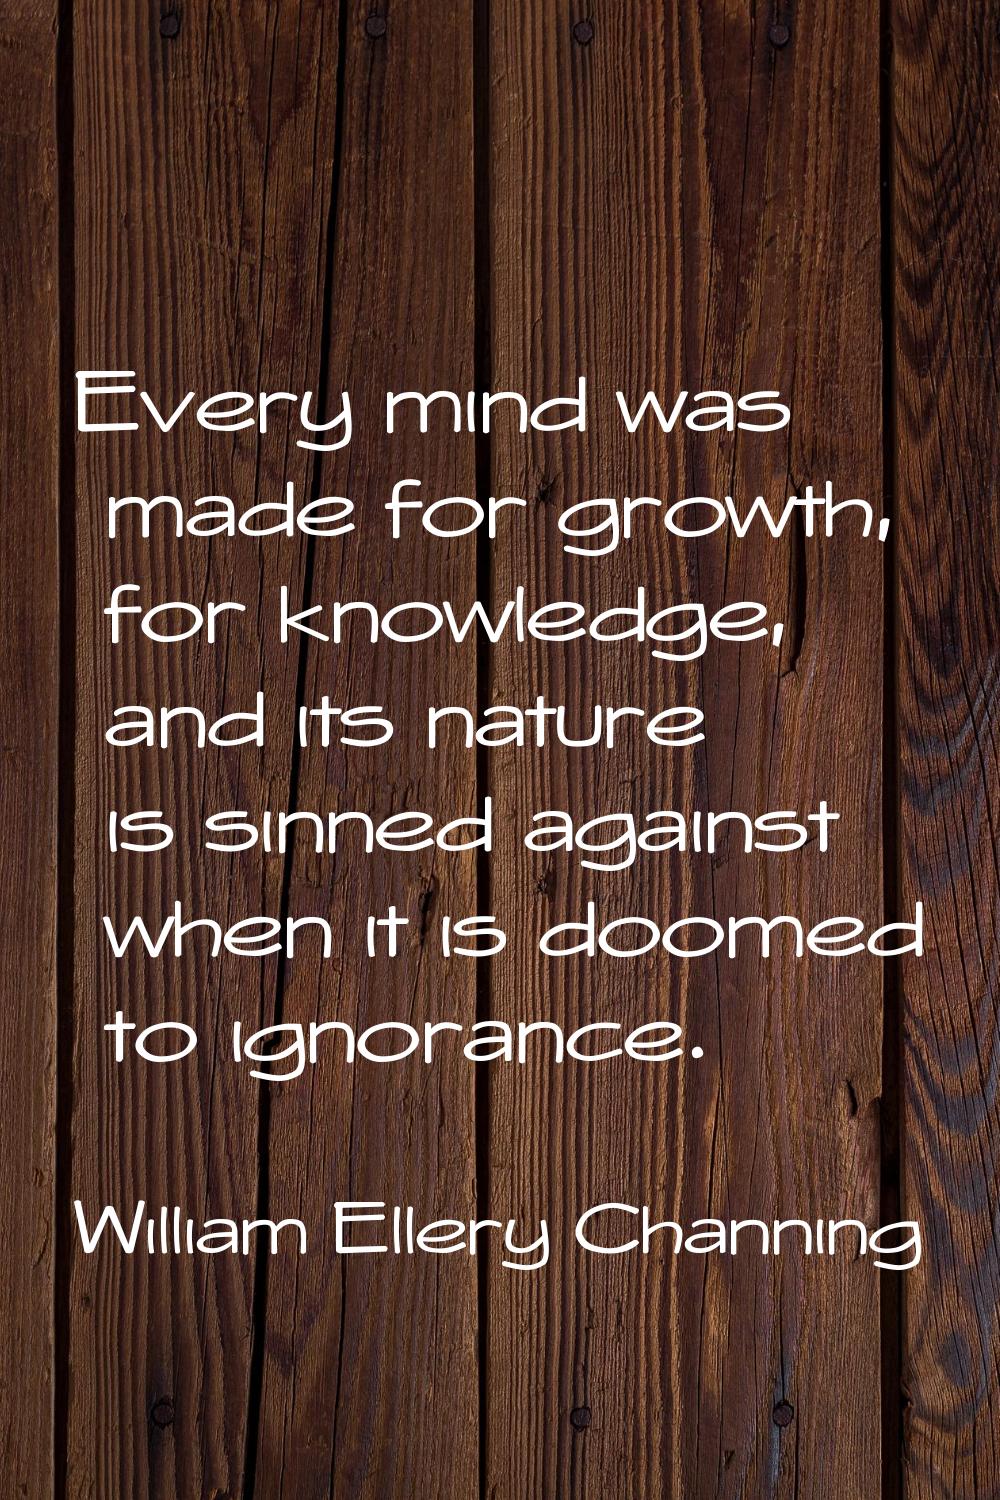 Every mind was made for growth, for knowledge, and its nature is sinned against when it is doomed t